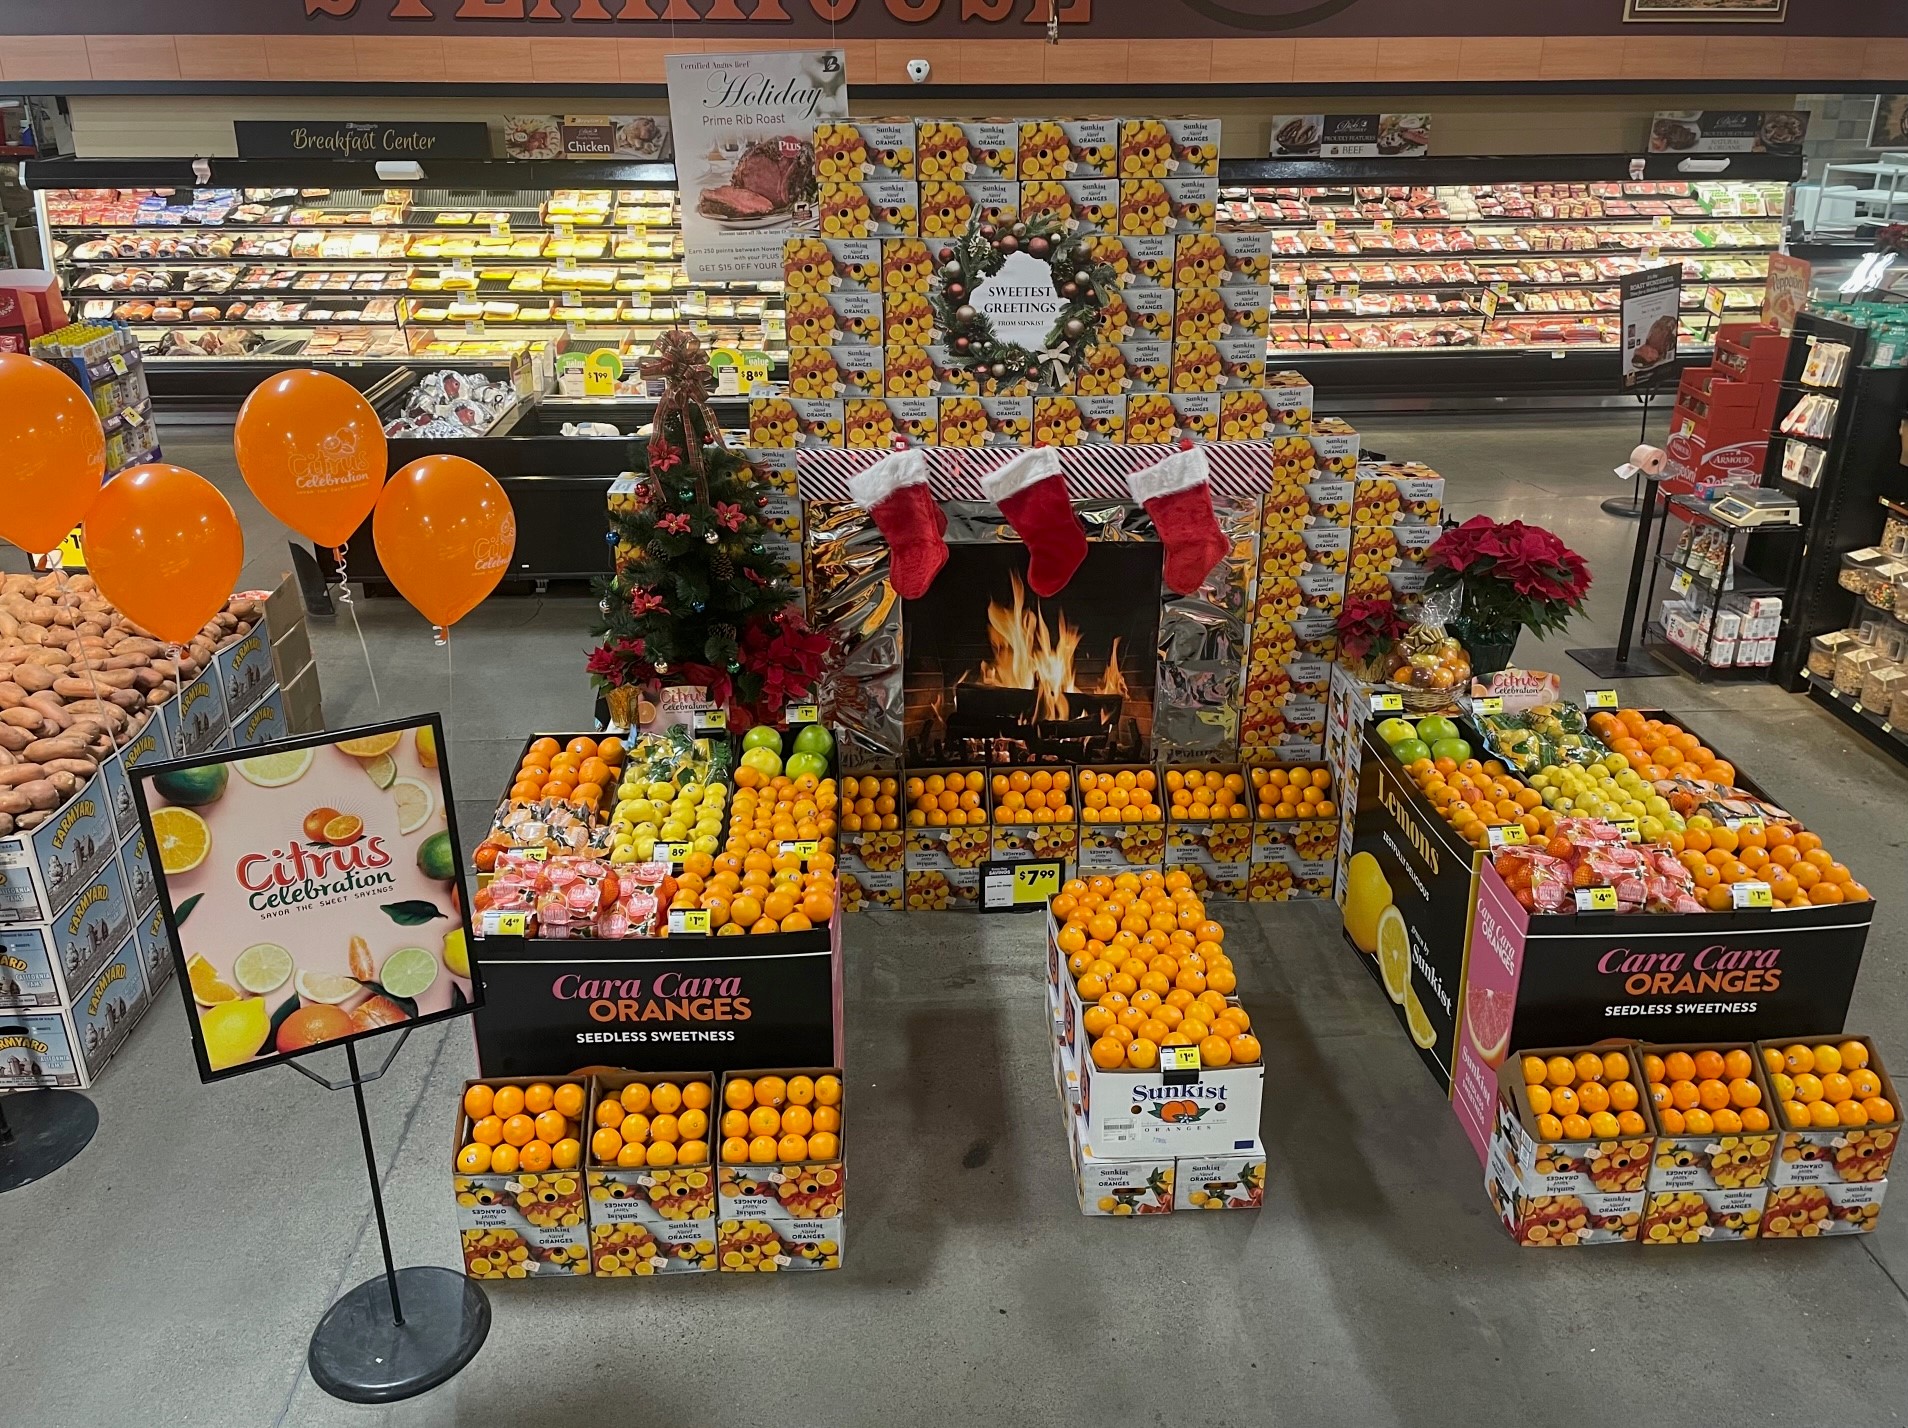  Best Citrus Display, honorable mention: Alan Summers of Broulim’s, Rexburg, Idaho.